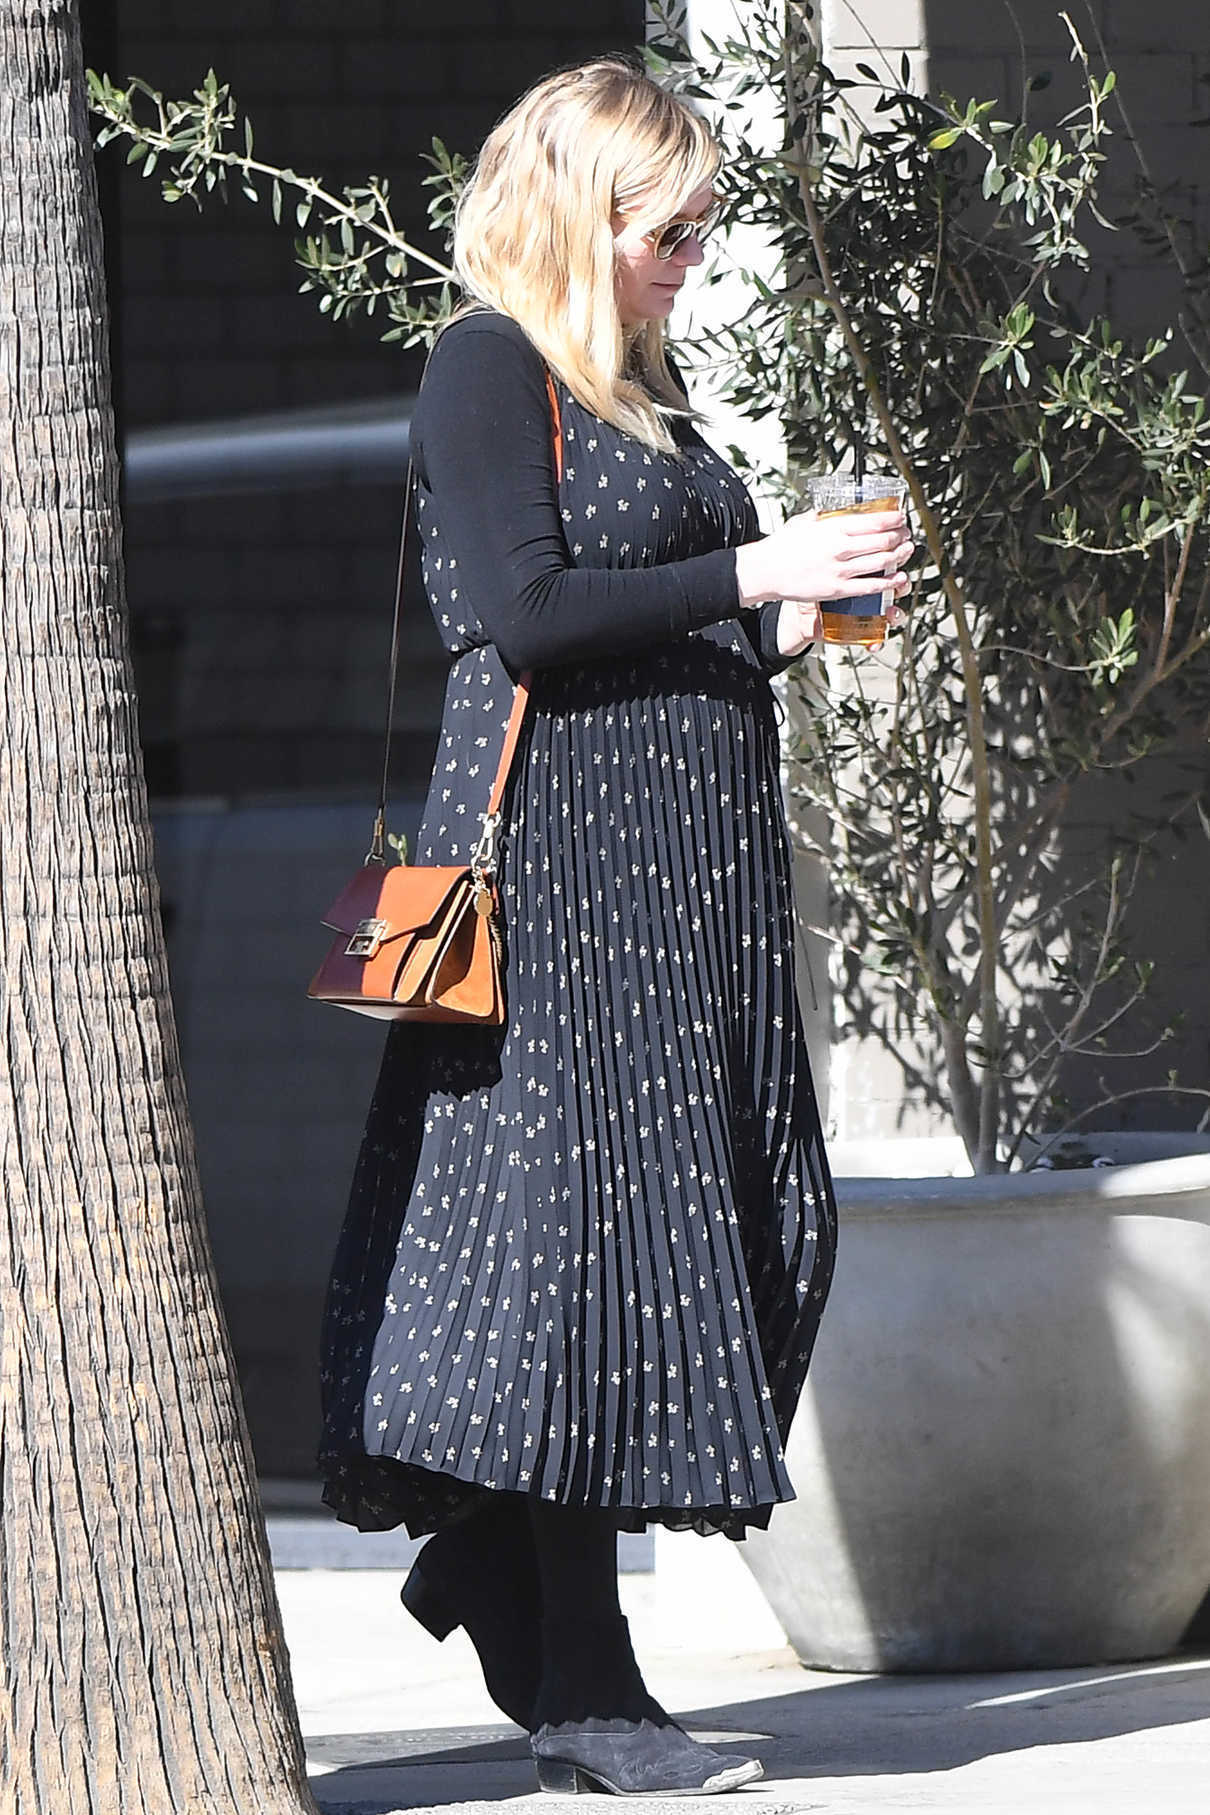 Kirsten Dunst Leaves the McConnell's Fine Ice Cream Shop with a Friend in Studio City 02/24/2018-4